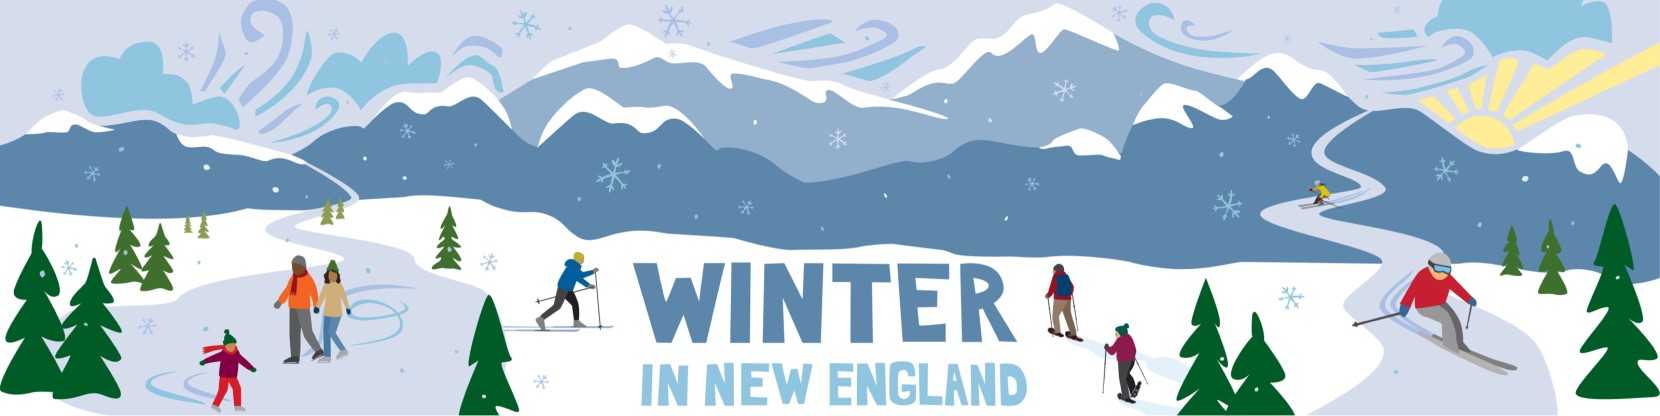 Illustration of a winter scene, text "Winter in New England."